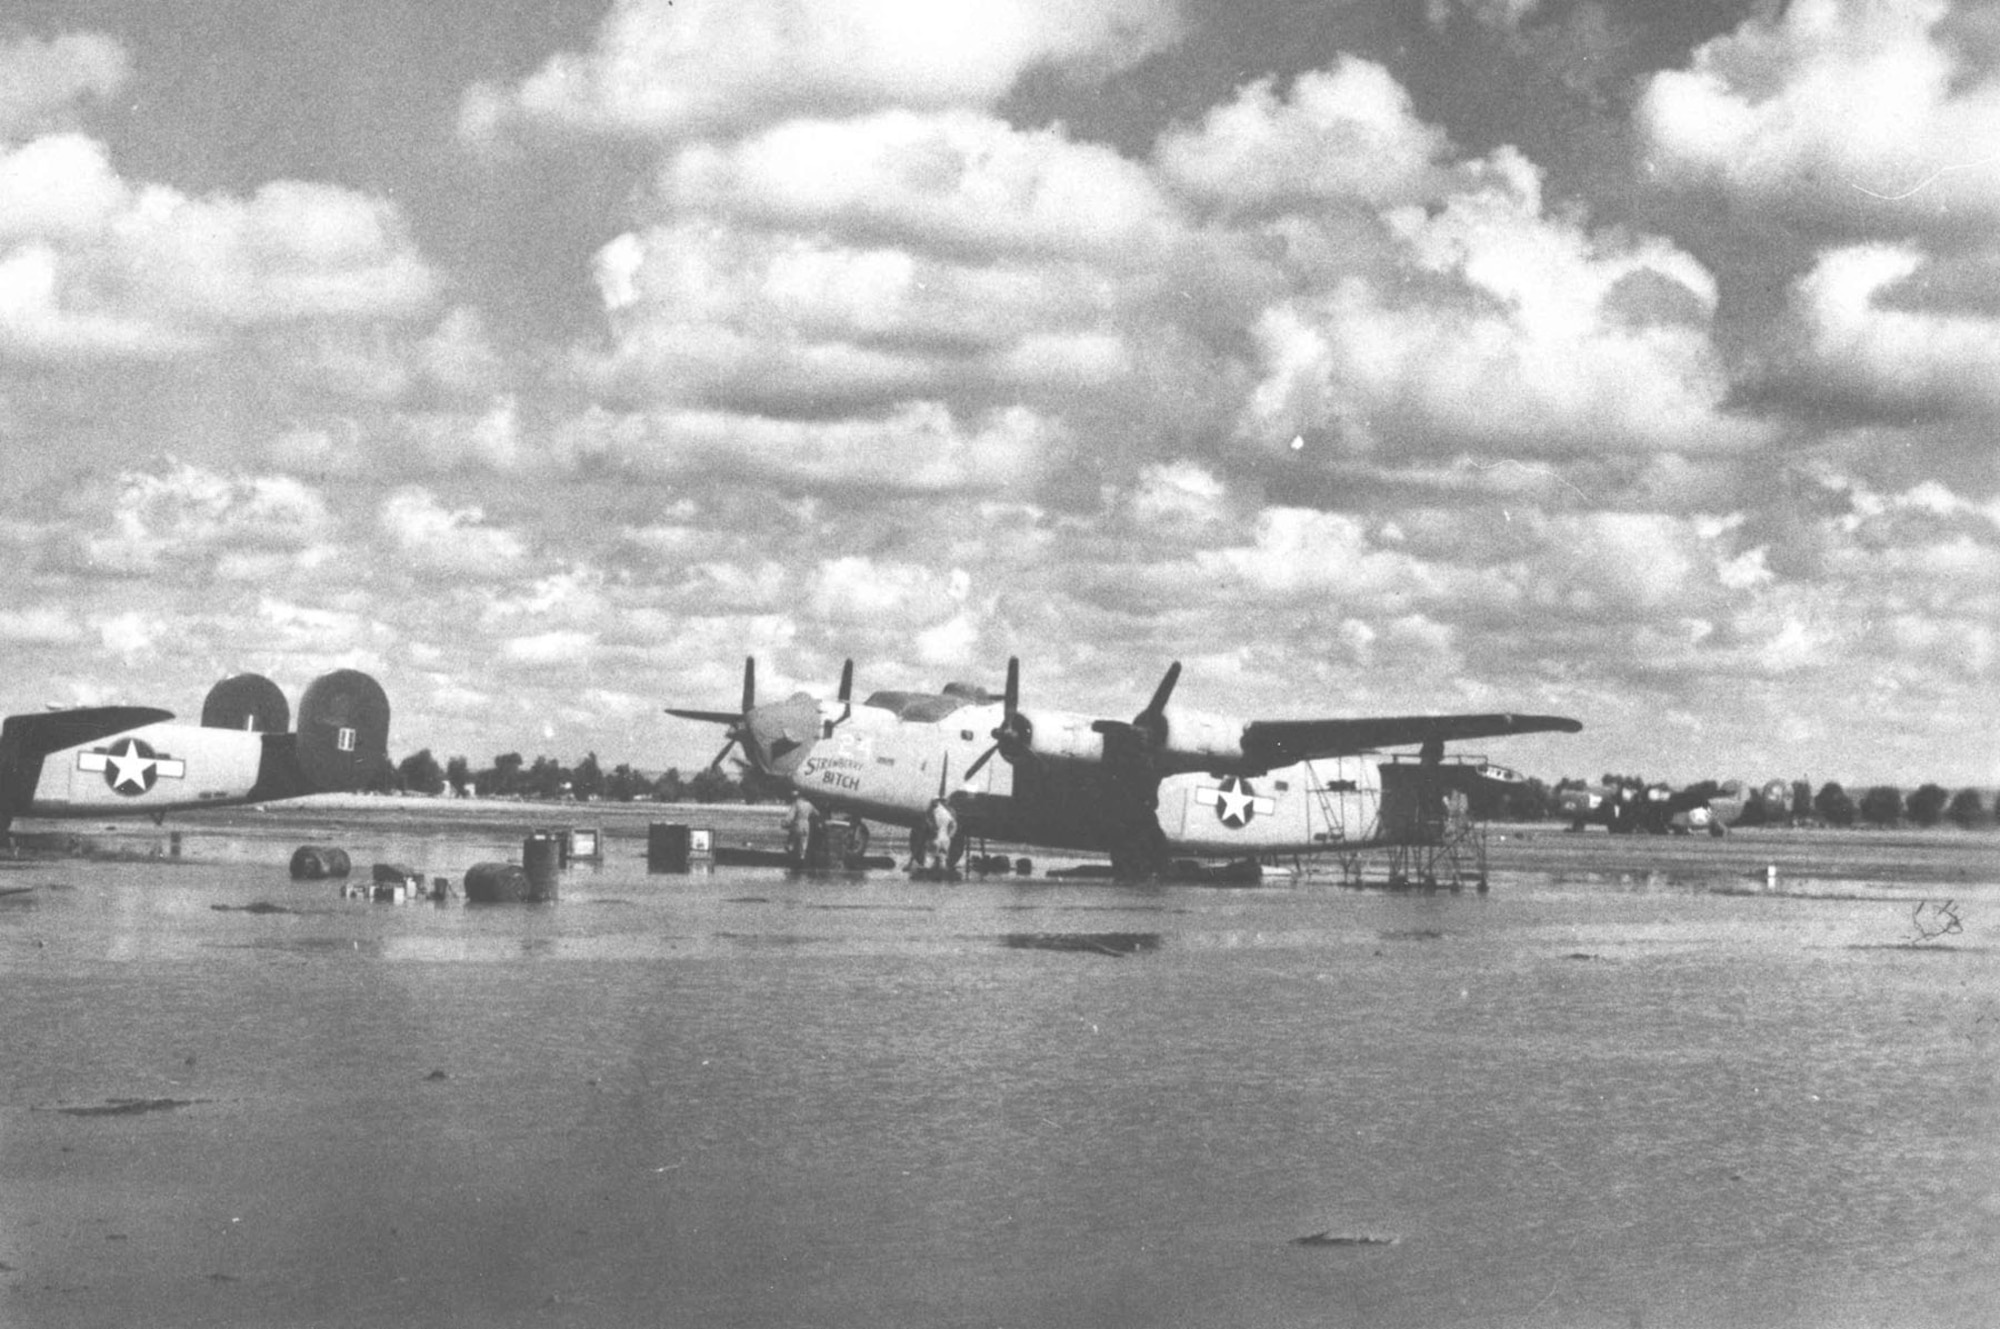 Consolidated B-24D "Strawberry Bitch" at the 58th Service Squadron depot (c. October 1943). Note the vertical stabilizers have been removed. (U.S. Air Force photo)